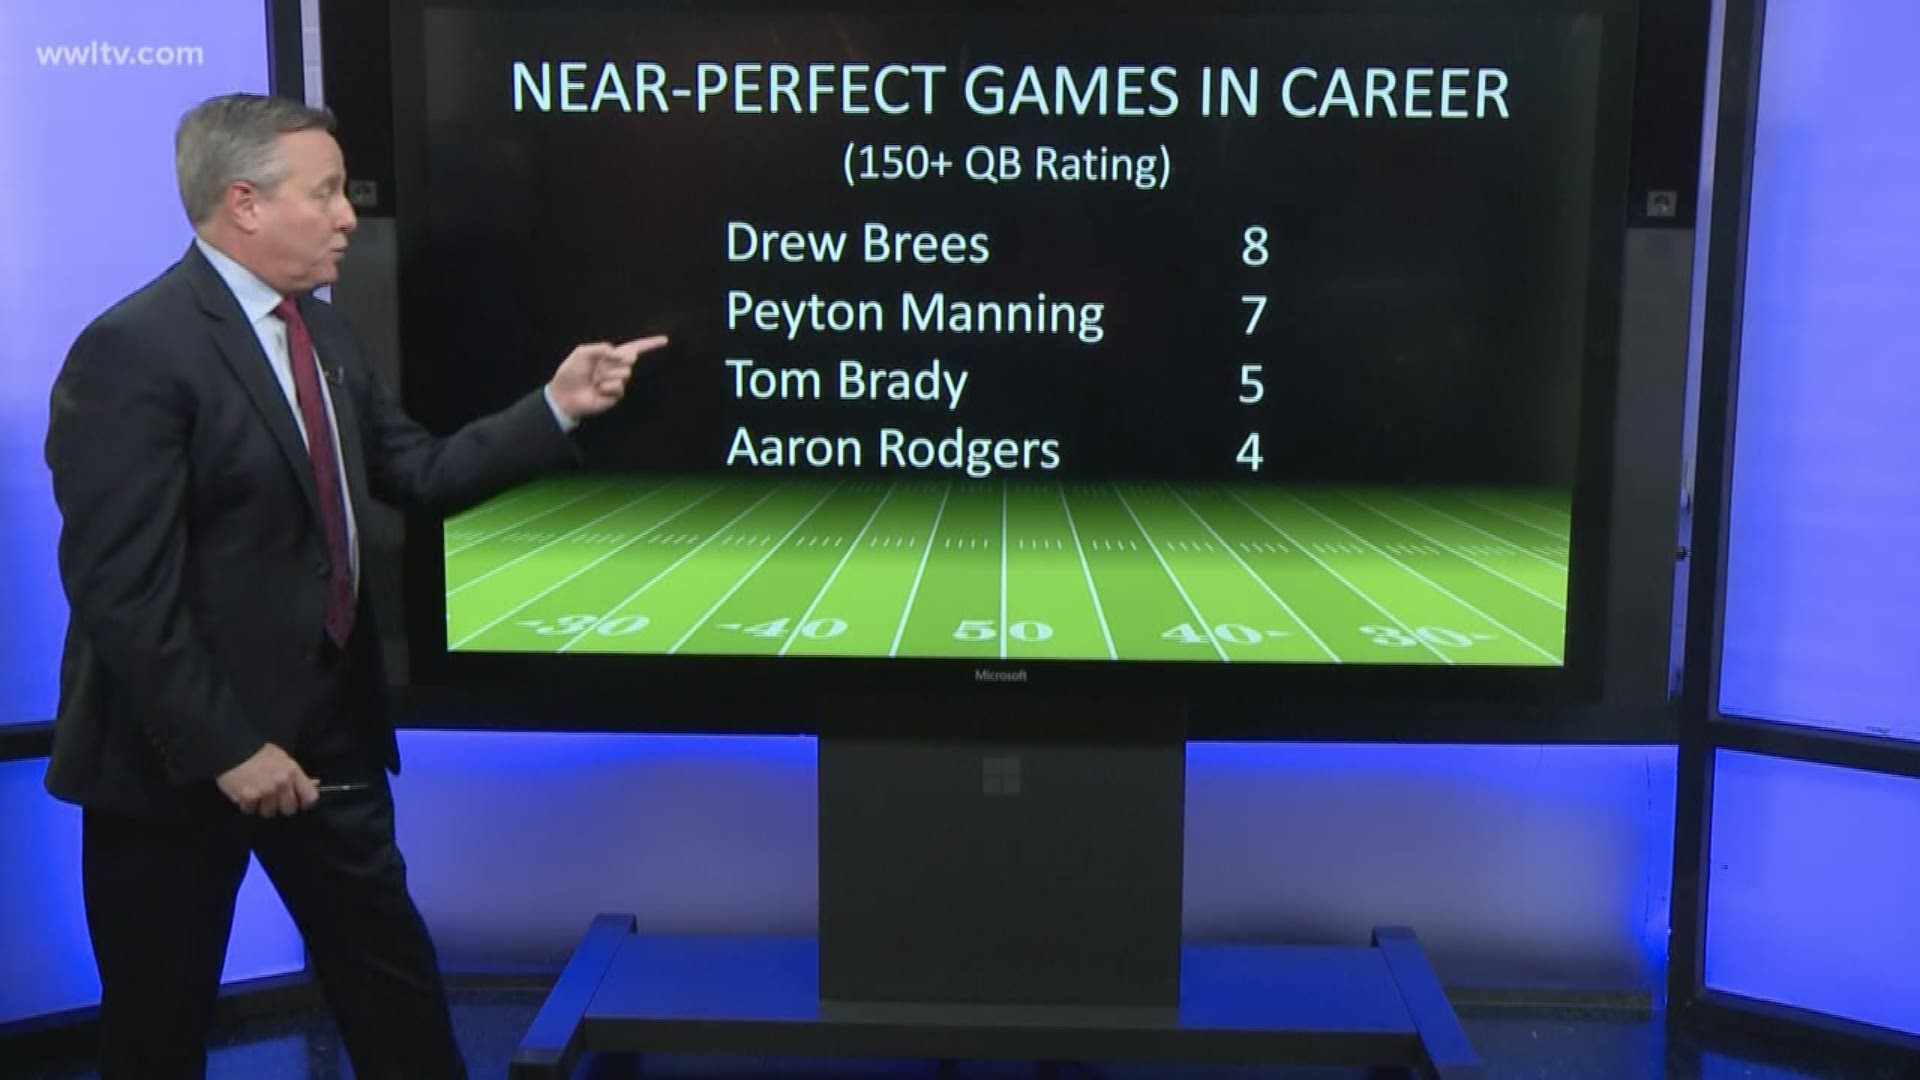 Before this season, Drew Brees had five near perfect games in his career. His game yesterday was his third near perfect game of this season.